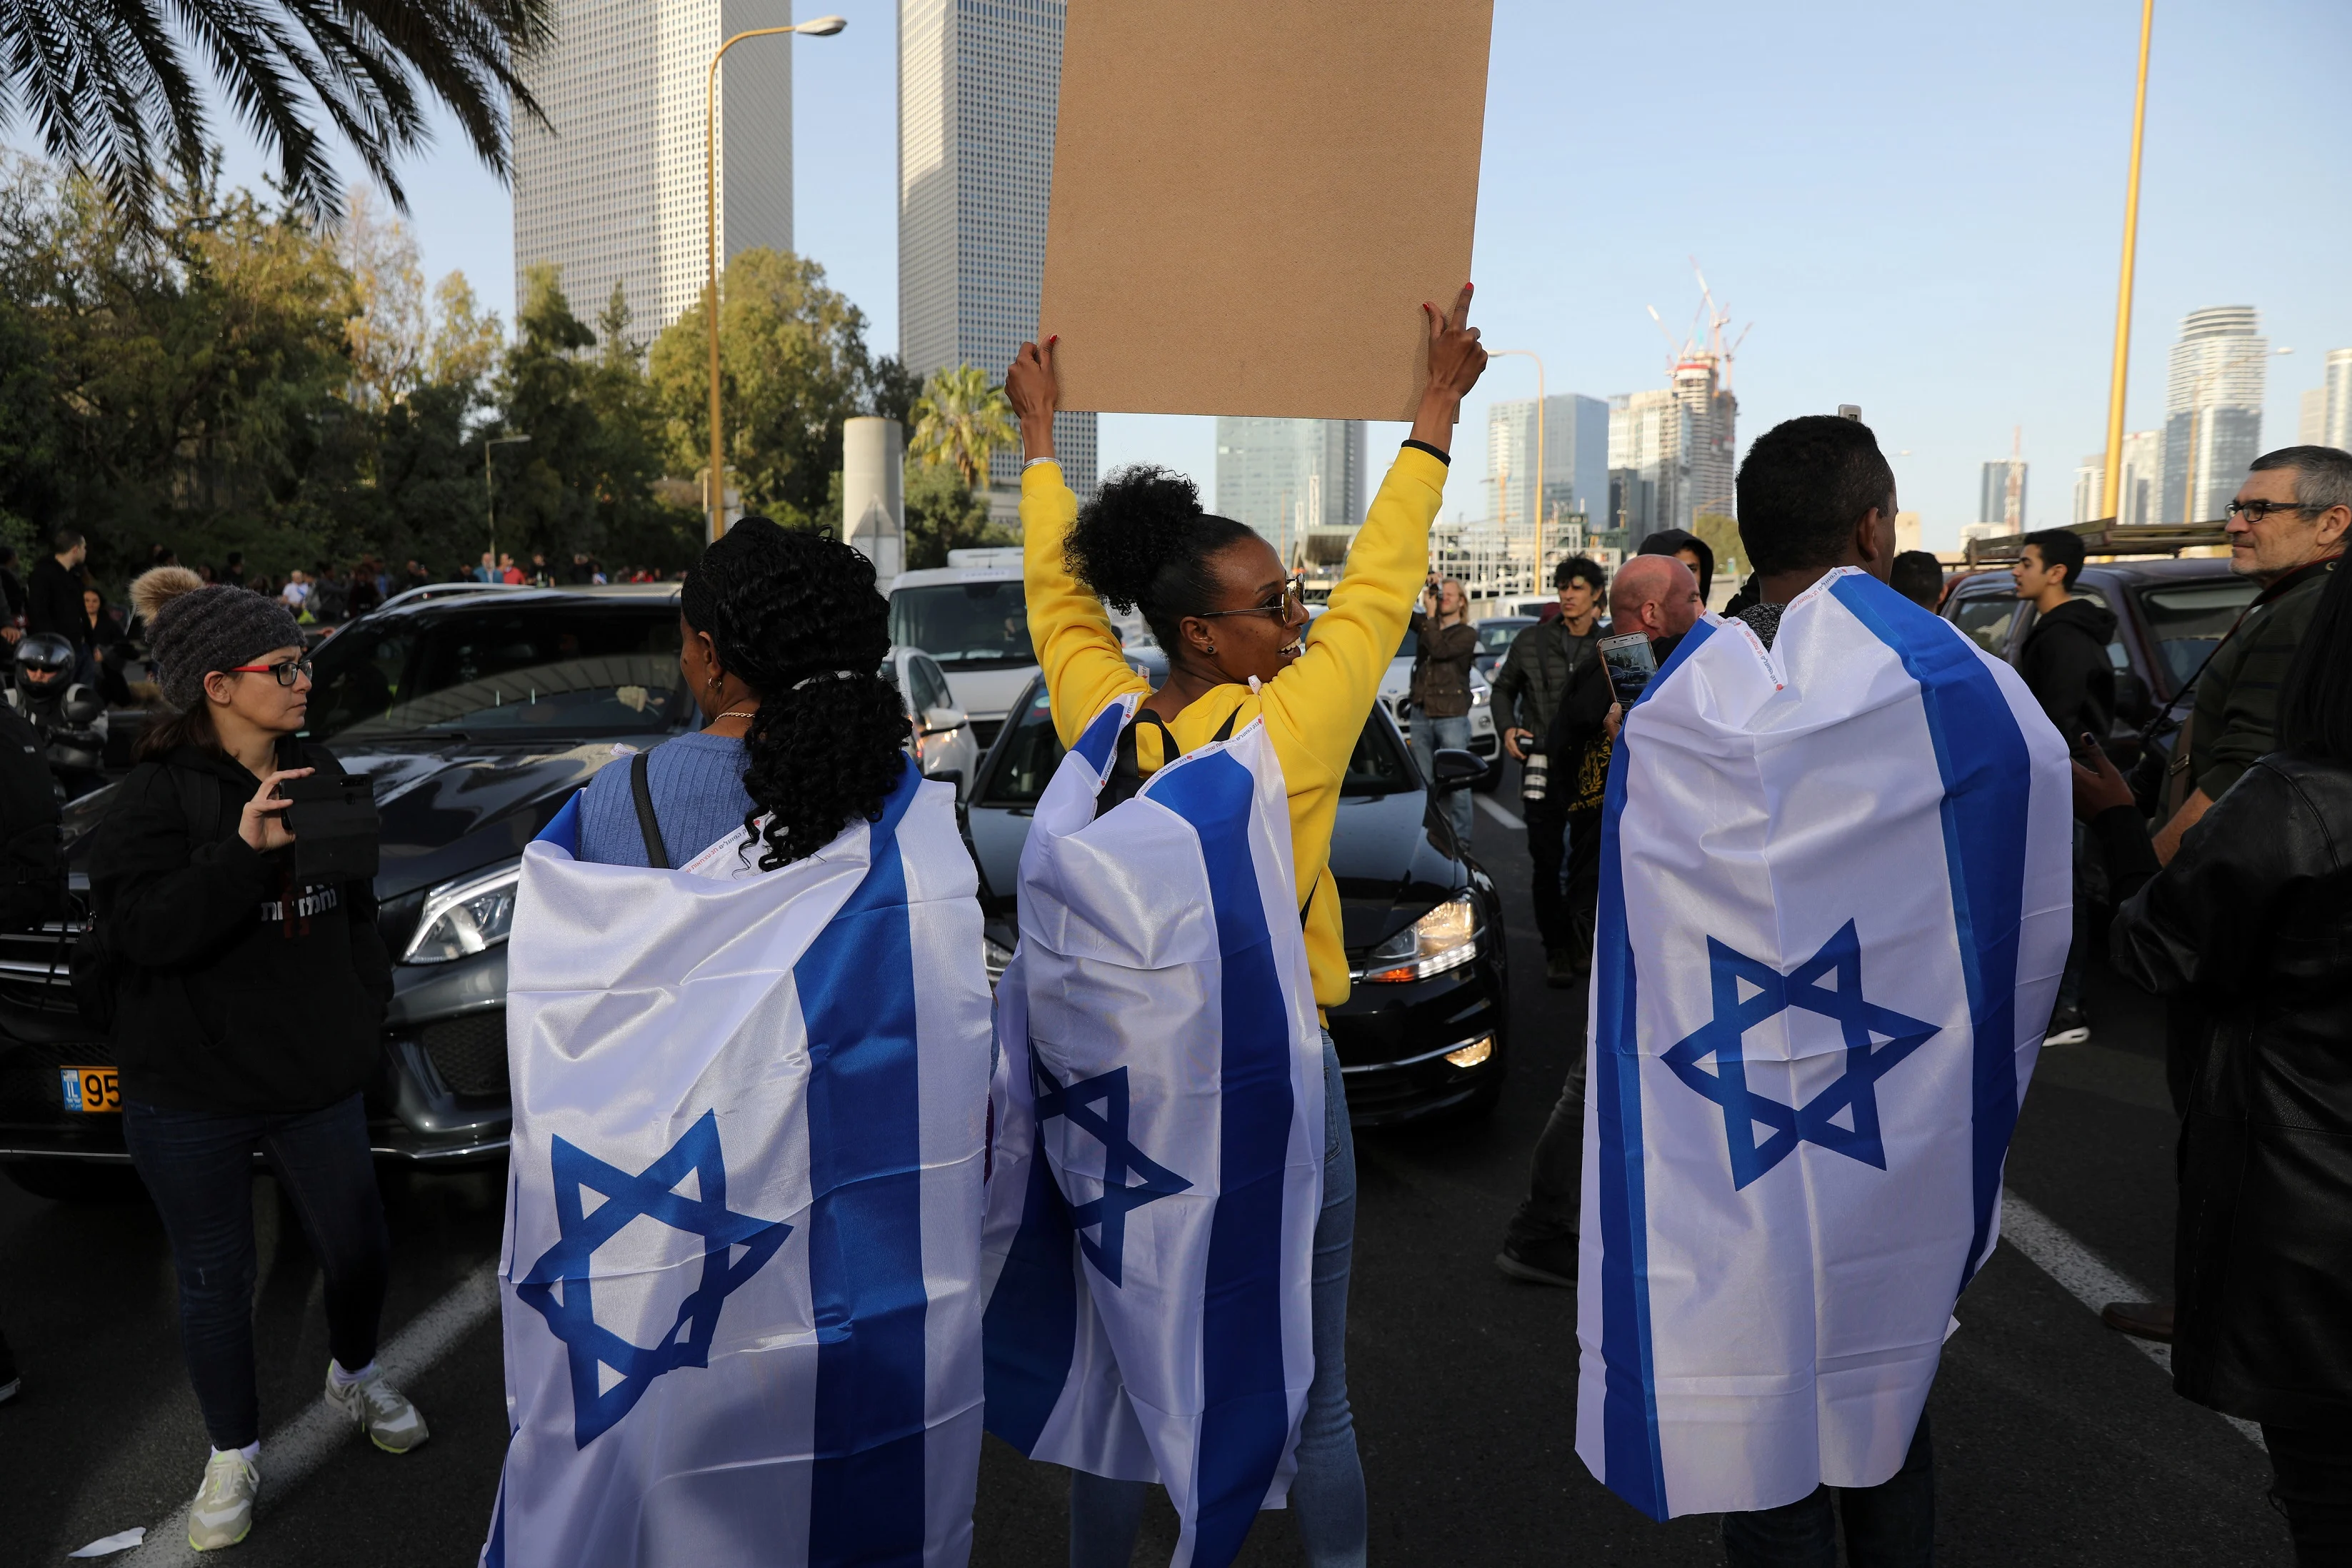 Israelis Of Ethiopian Decent Cover Themselves With Israeli Flags As They Take Part In A Demonstration Against Police Brutality, Following The Death Of An Israeli Ethiopian Community Member, Yehuda Biadga, In Tel Aviv, Israel